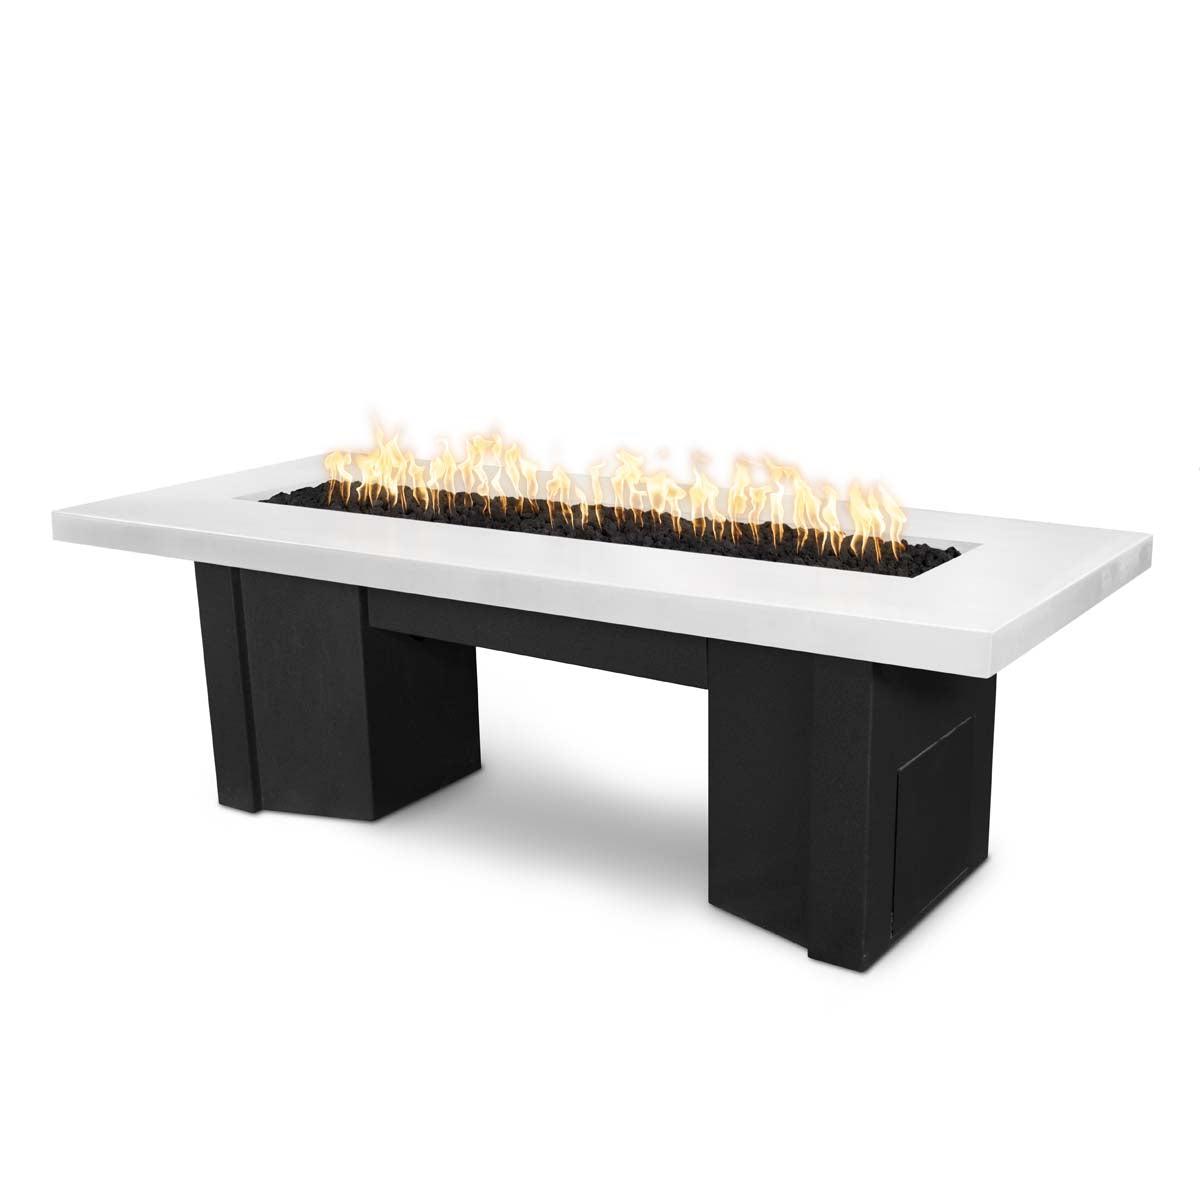 The Outdoor Plus Rectangular Alameda 60" Black & White Powder Coated Natural Gas Fire Pit with Match Lit Ignition